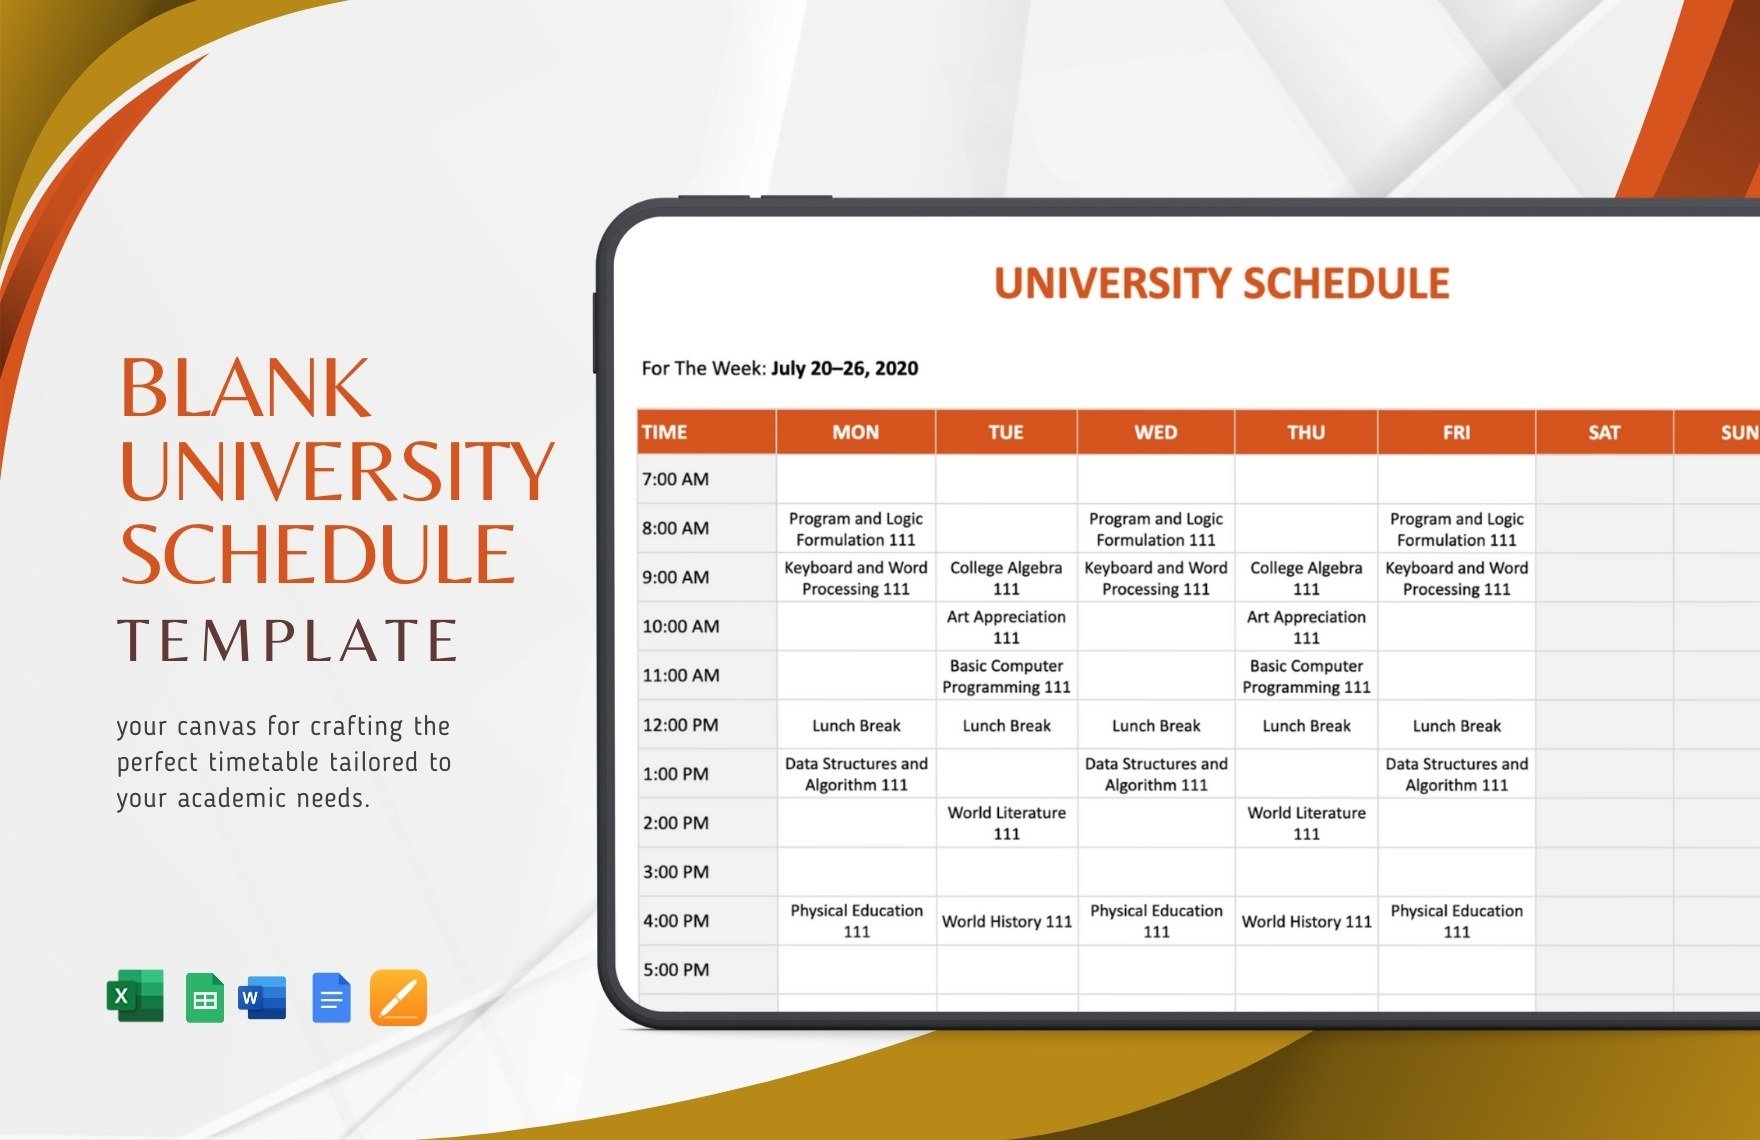 Blank University Schedule Template in Word, Google Docs, Excel, Google Sheets, Apple Pages